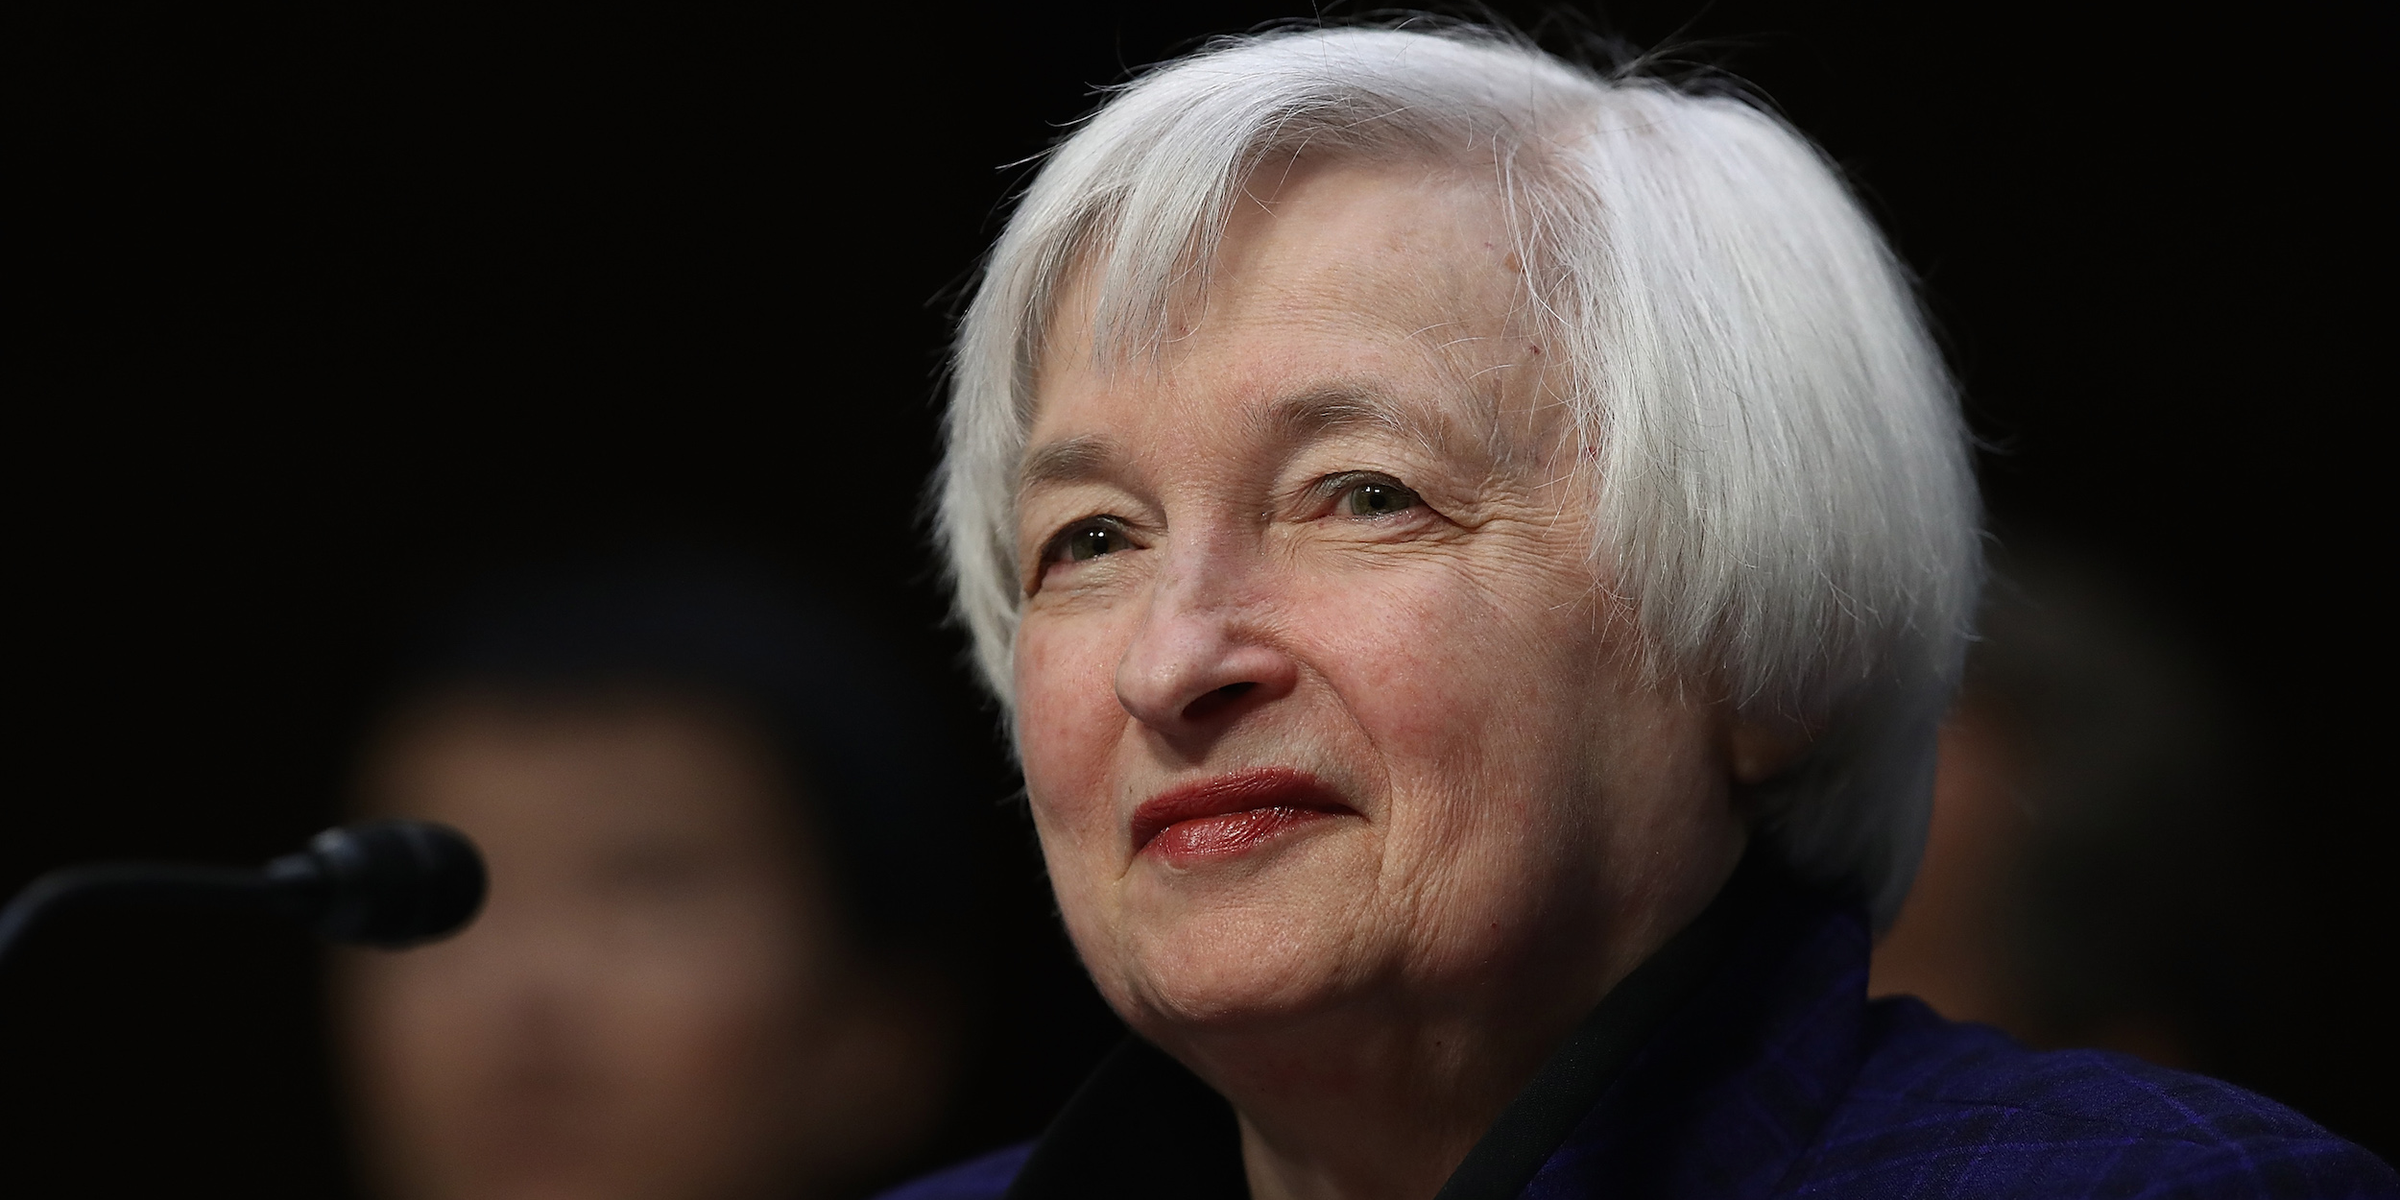 Former Fed Chair Janet Yellen says it's OK for the US to add to its $23 trillion debt pile — as long as it's used to pay for climate change and education programs